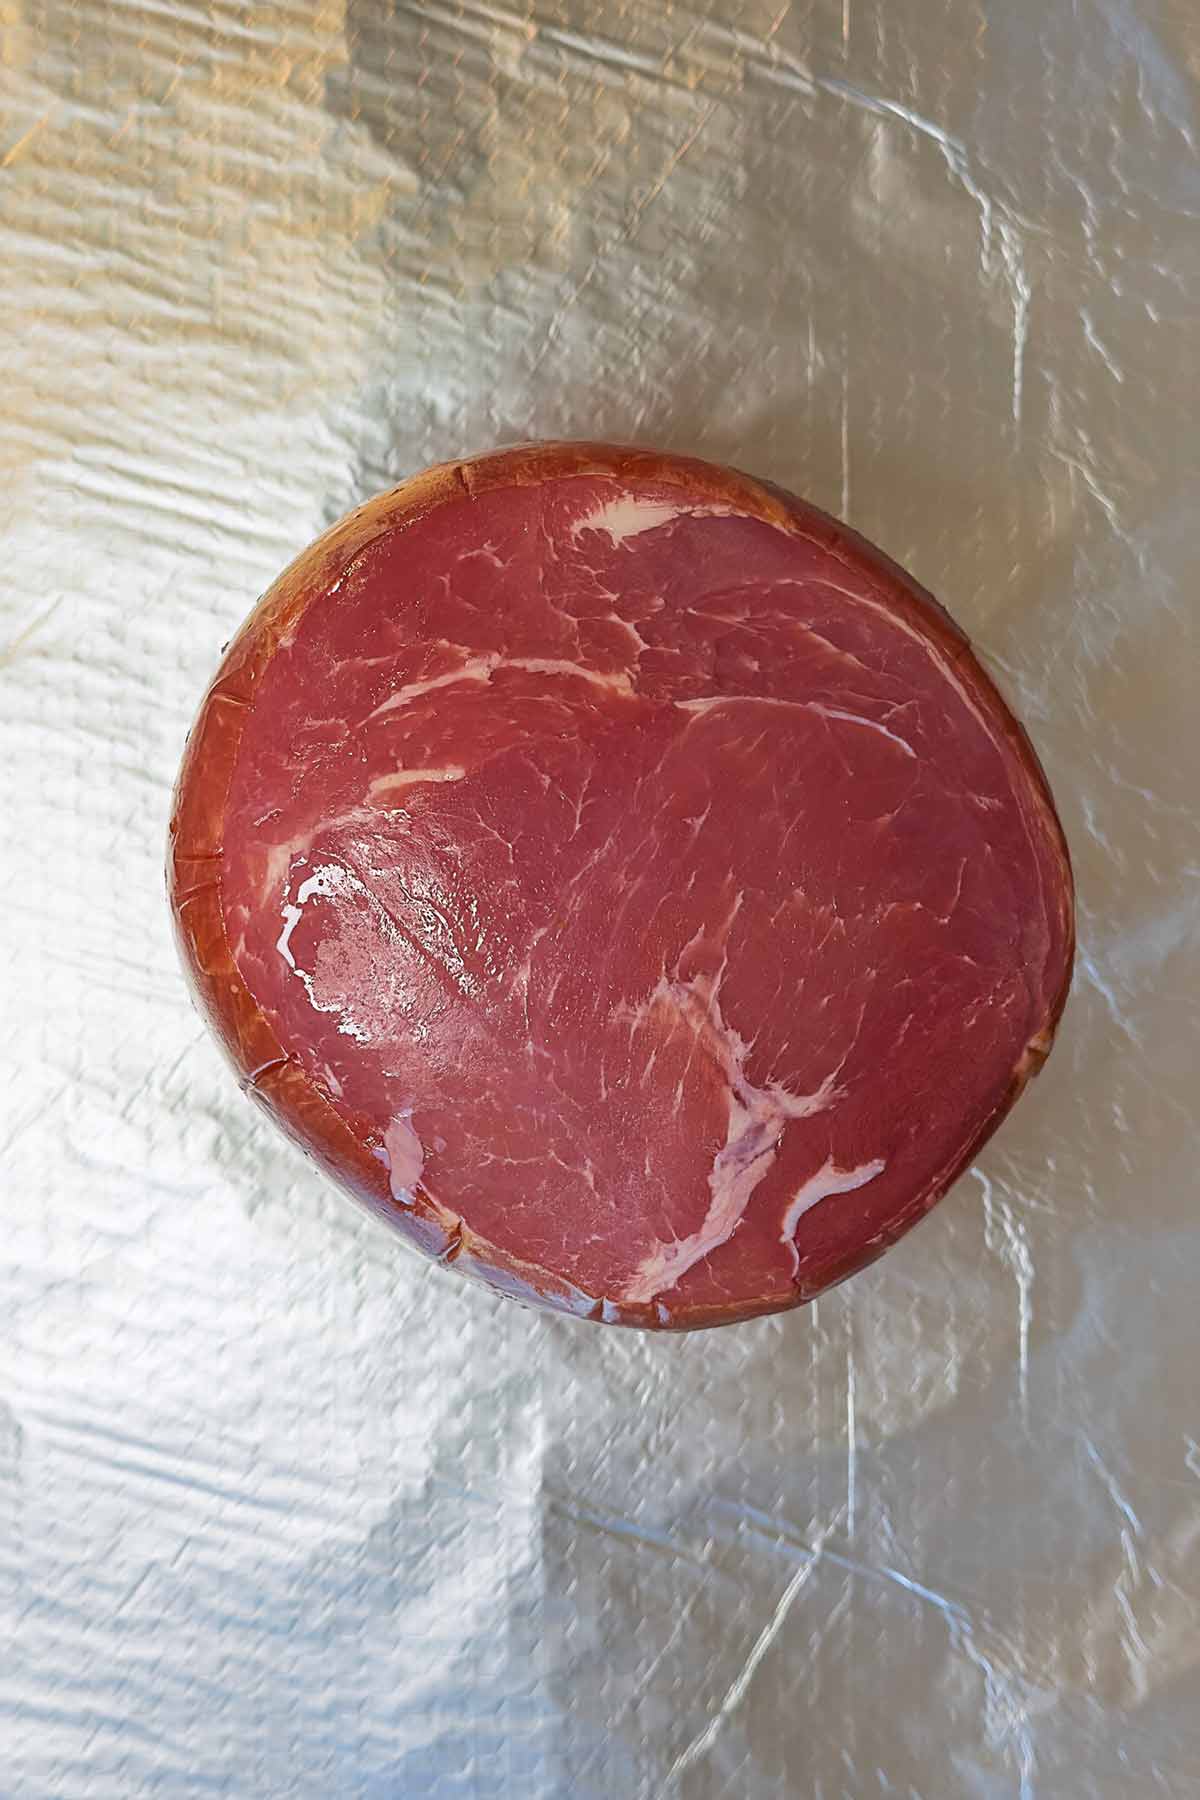 An uncooked gammon joint on a sheet of foil.